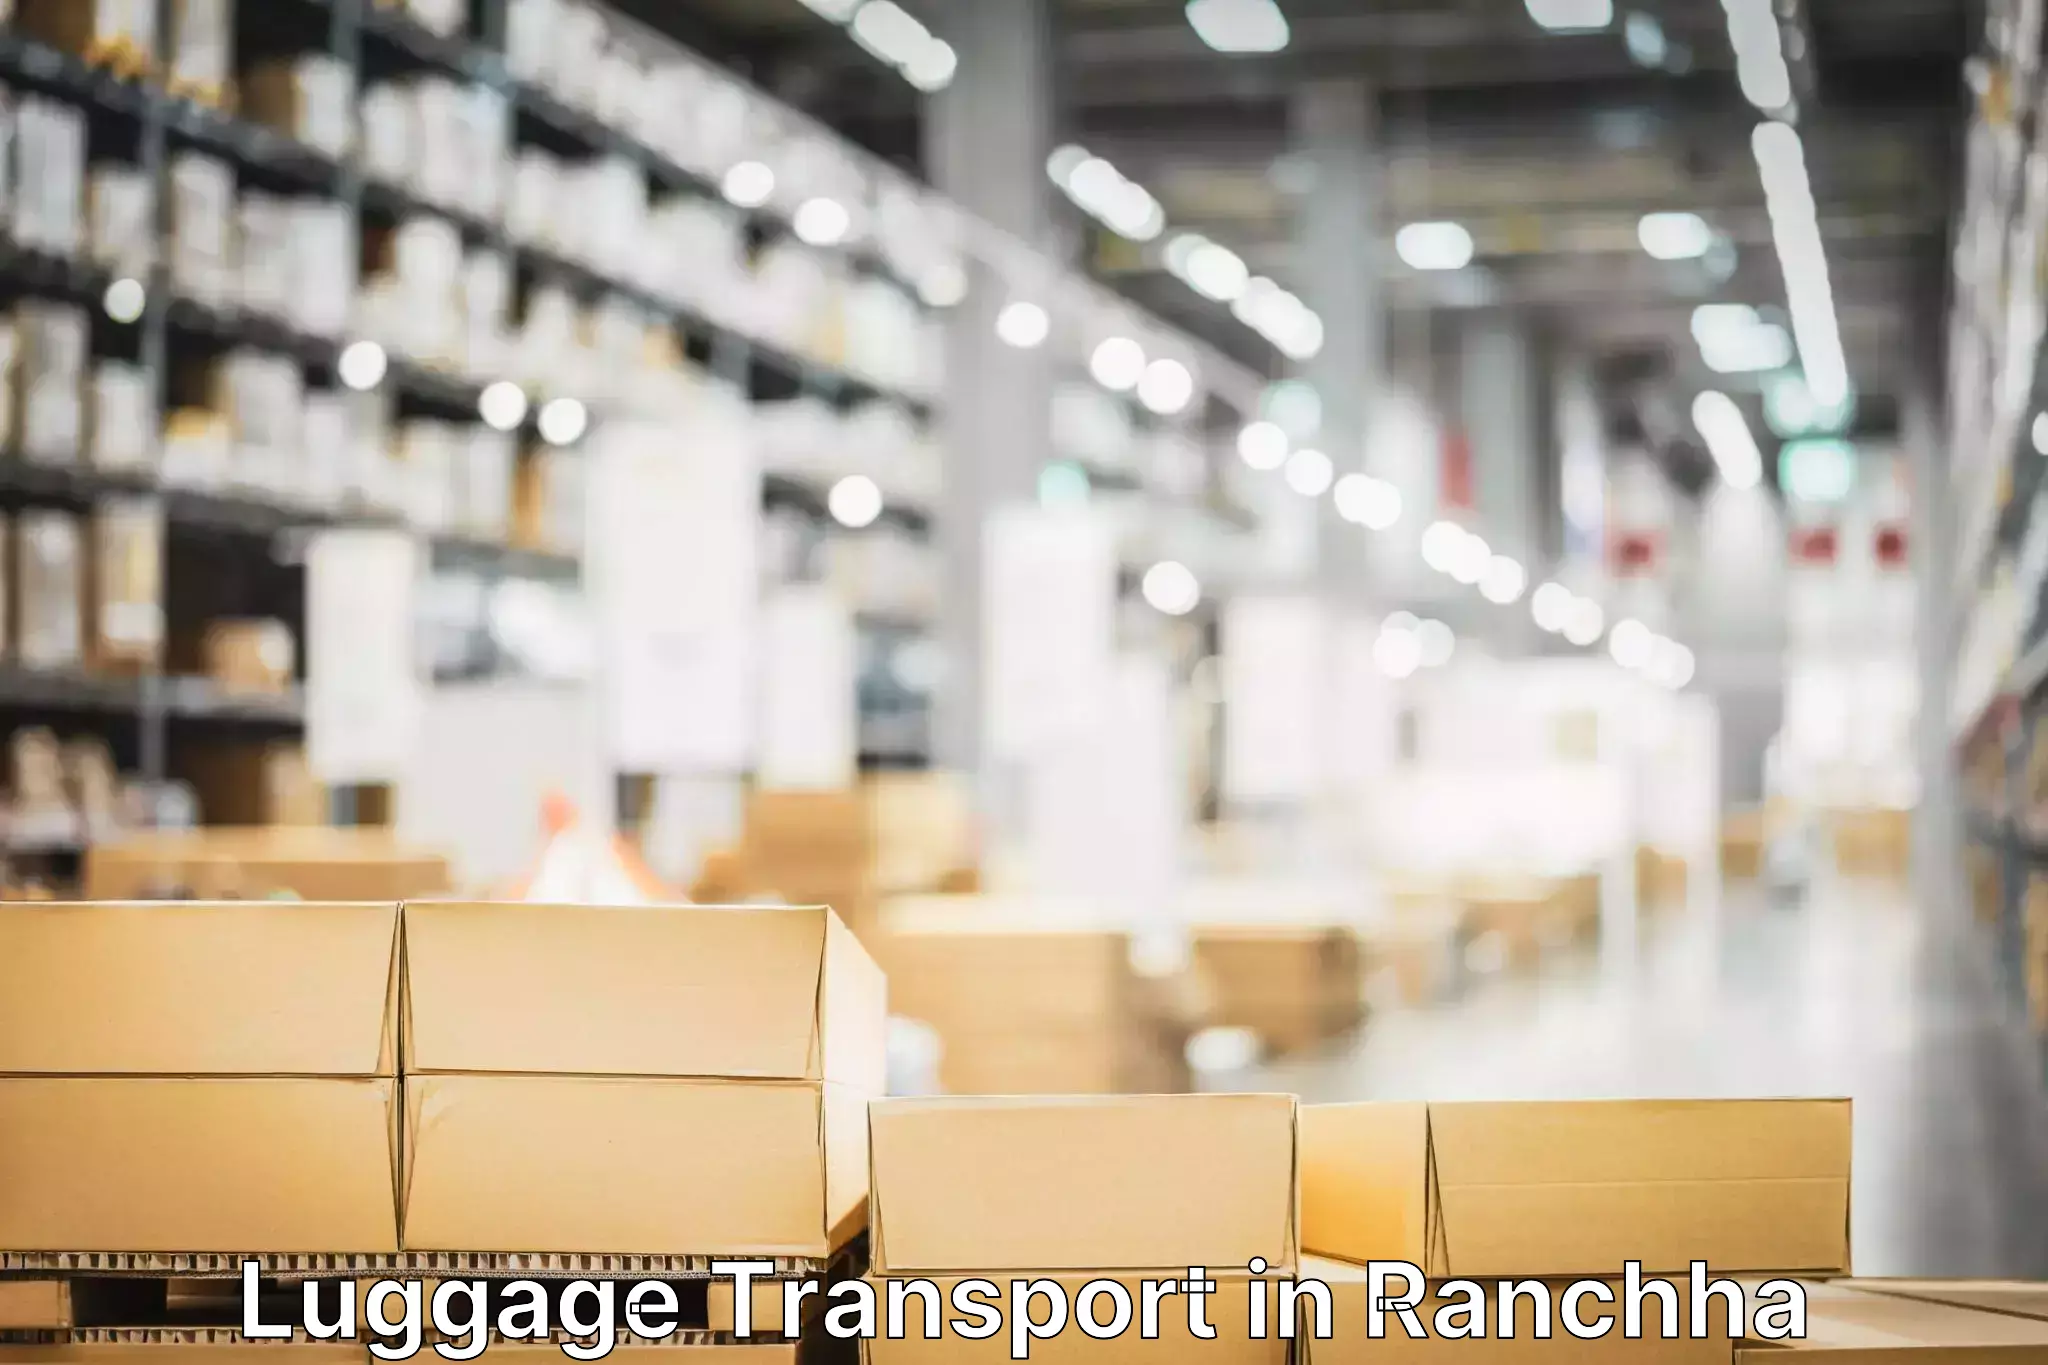 Baggage transport services in Ranchha